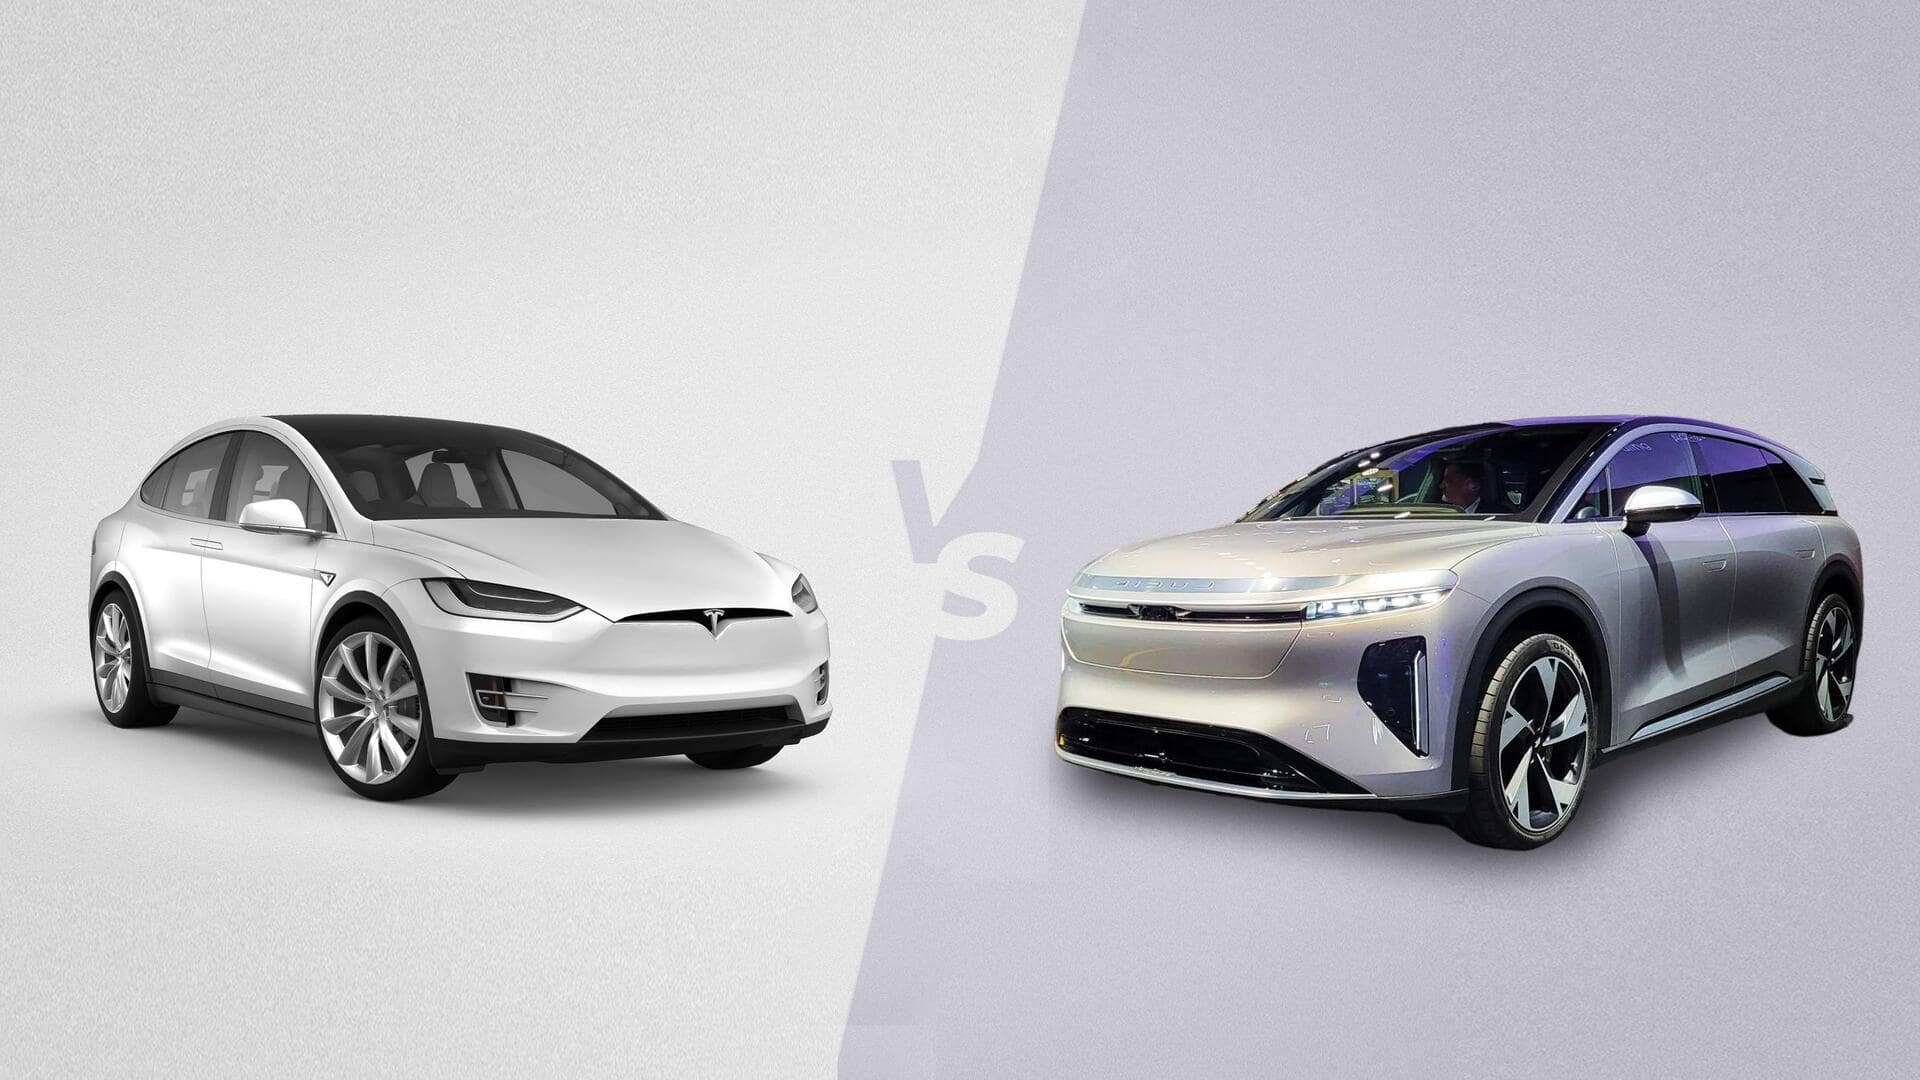 Lucid Gravity or Tesla Model X: Which is better